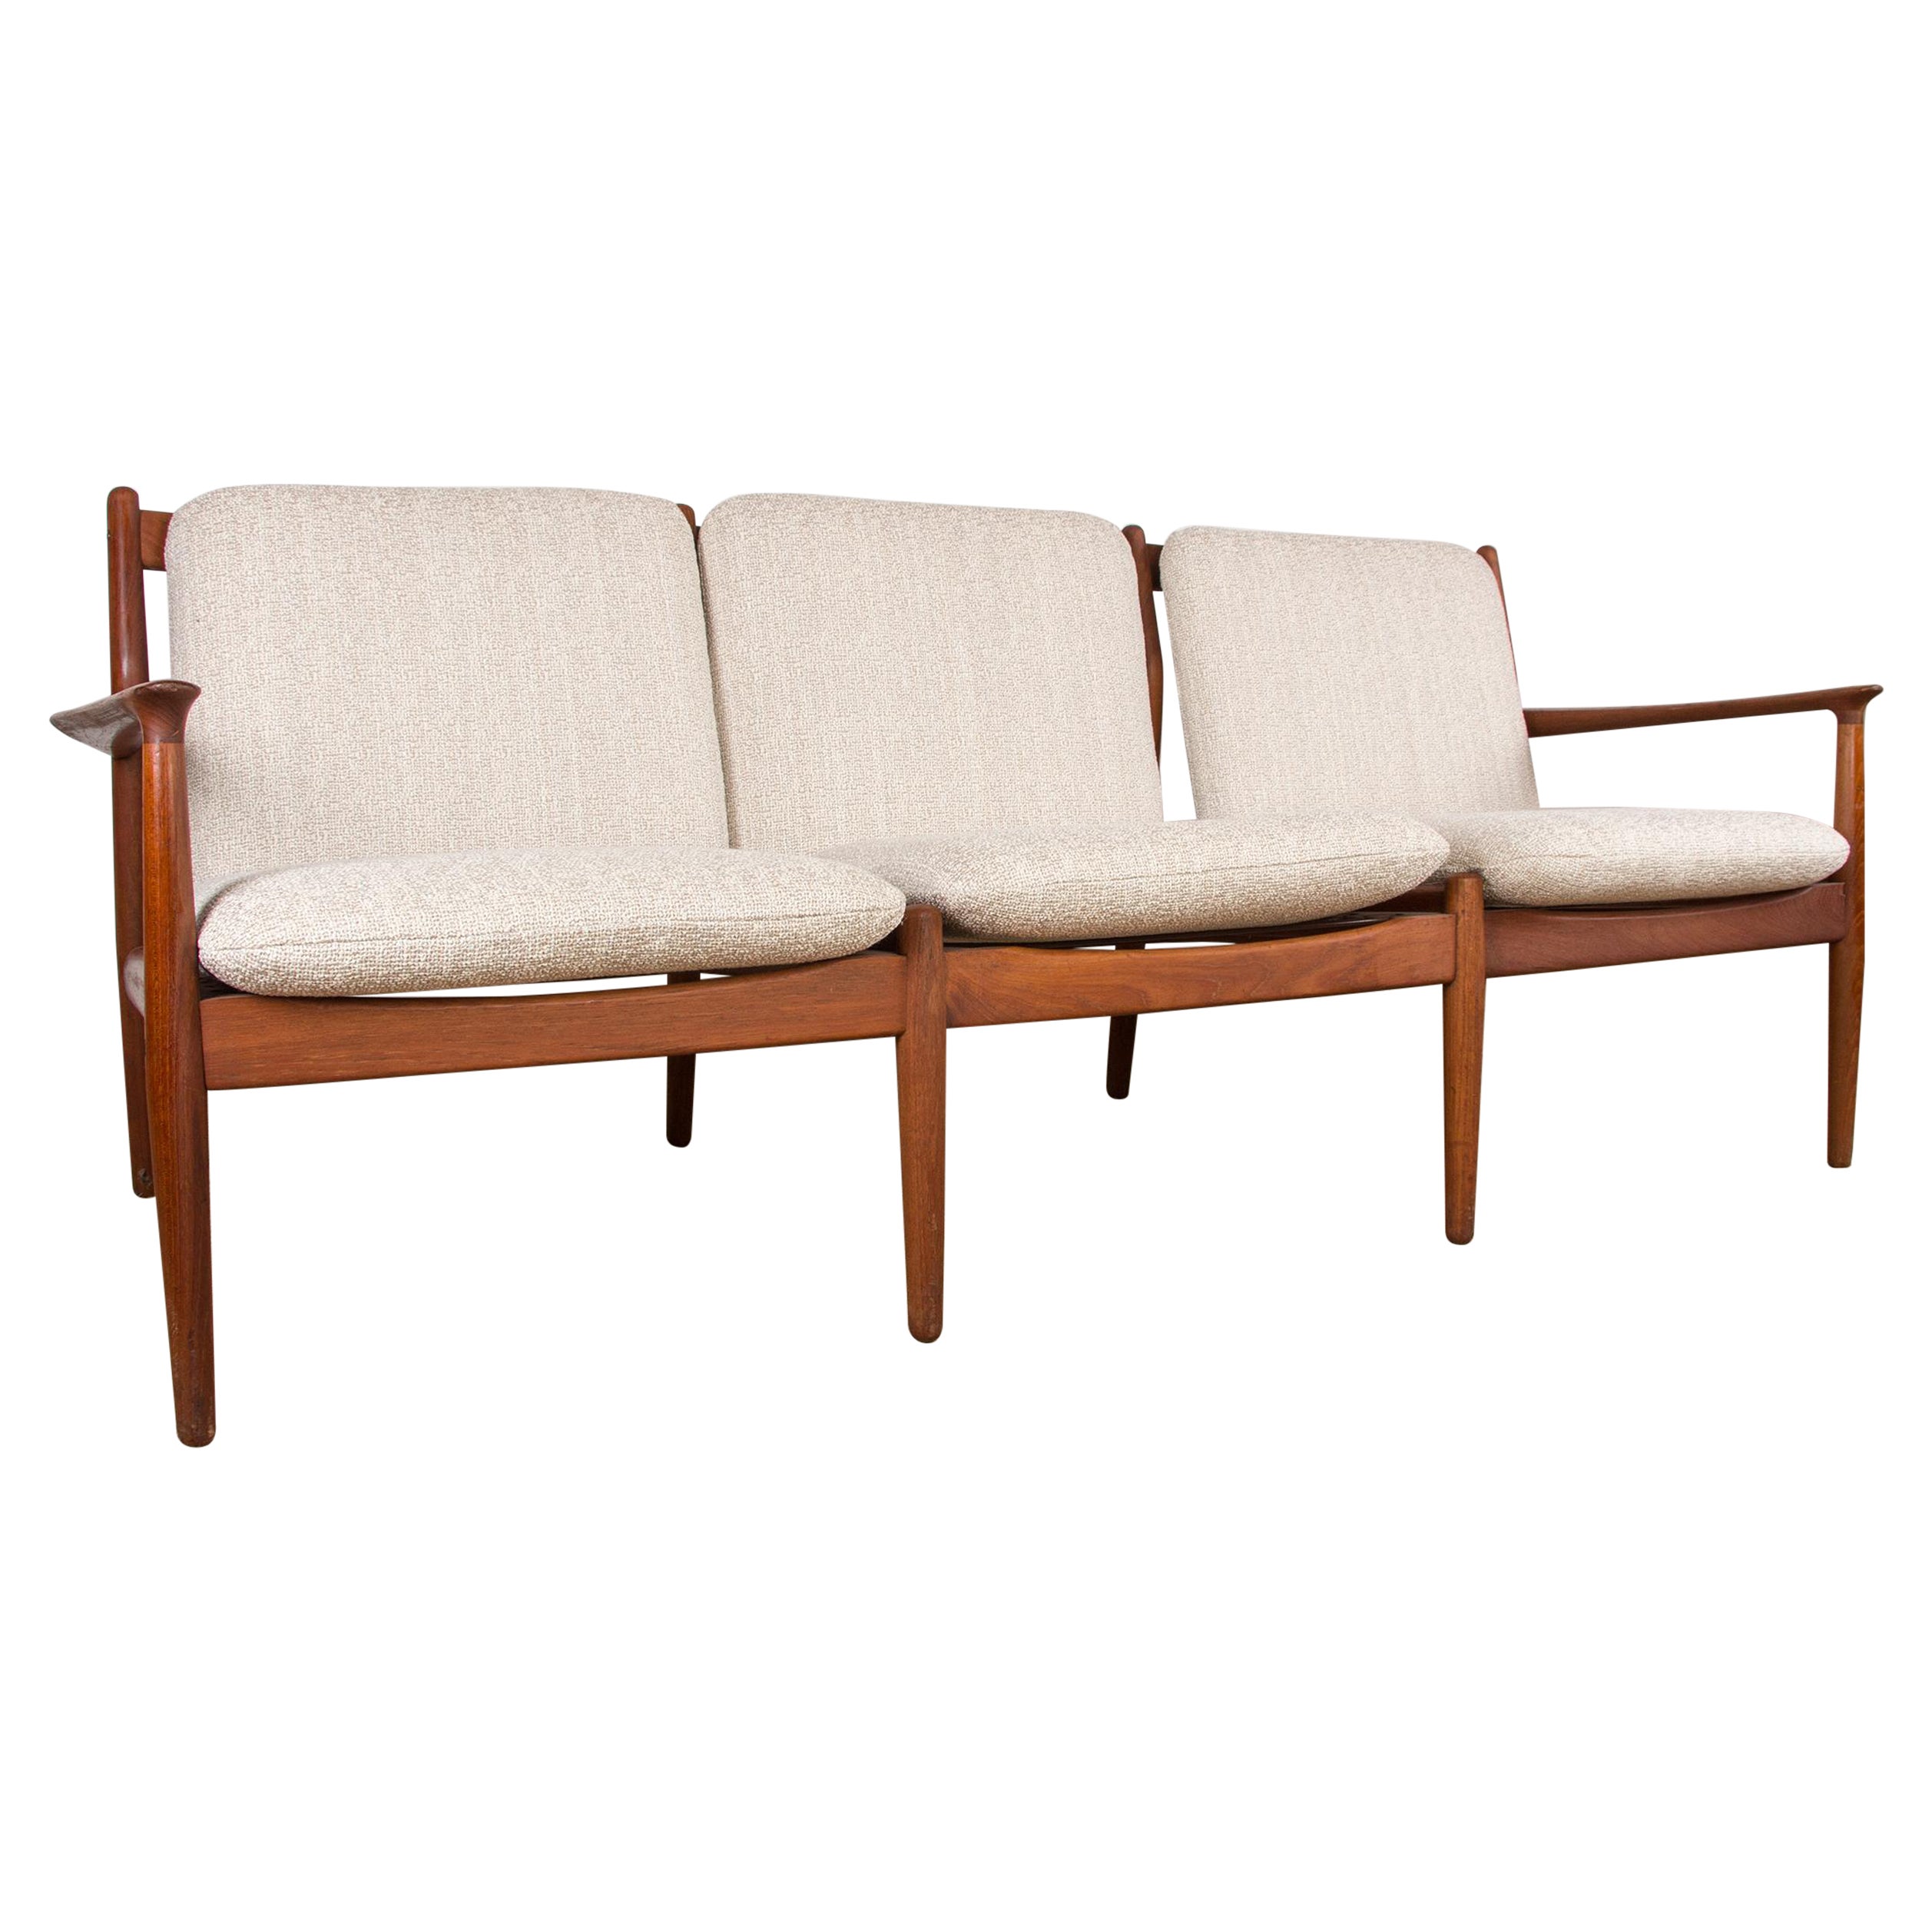 Danish 3-Seater Sofa in Teak and New Terry Fabric, Model GM5, by Svend Age Eriks